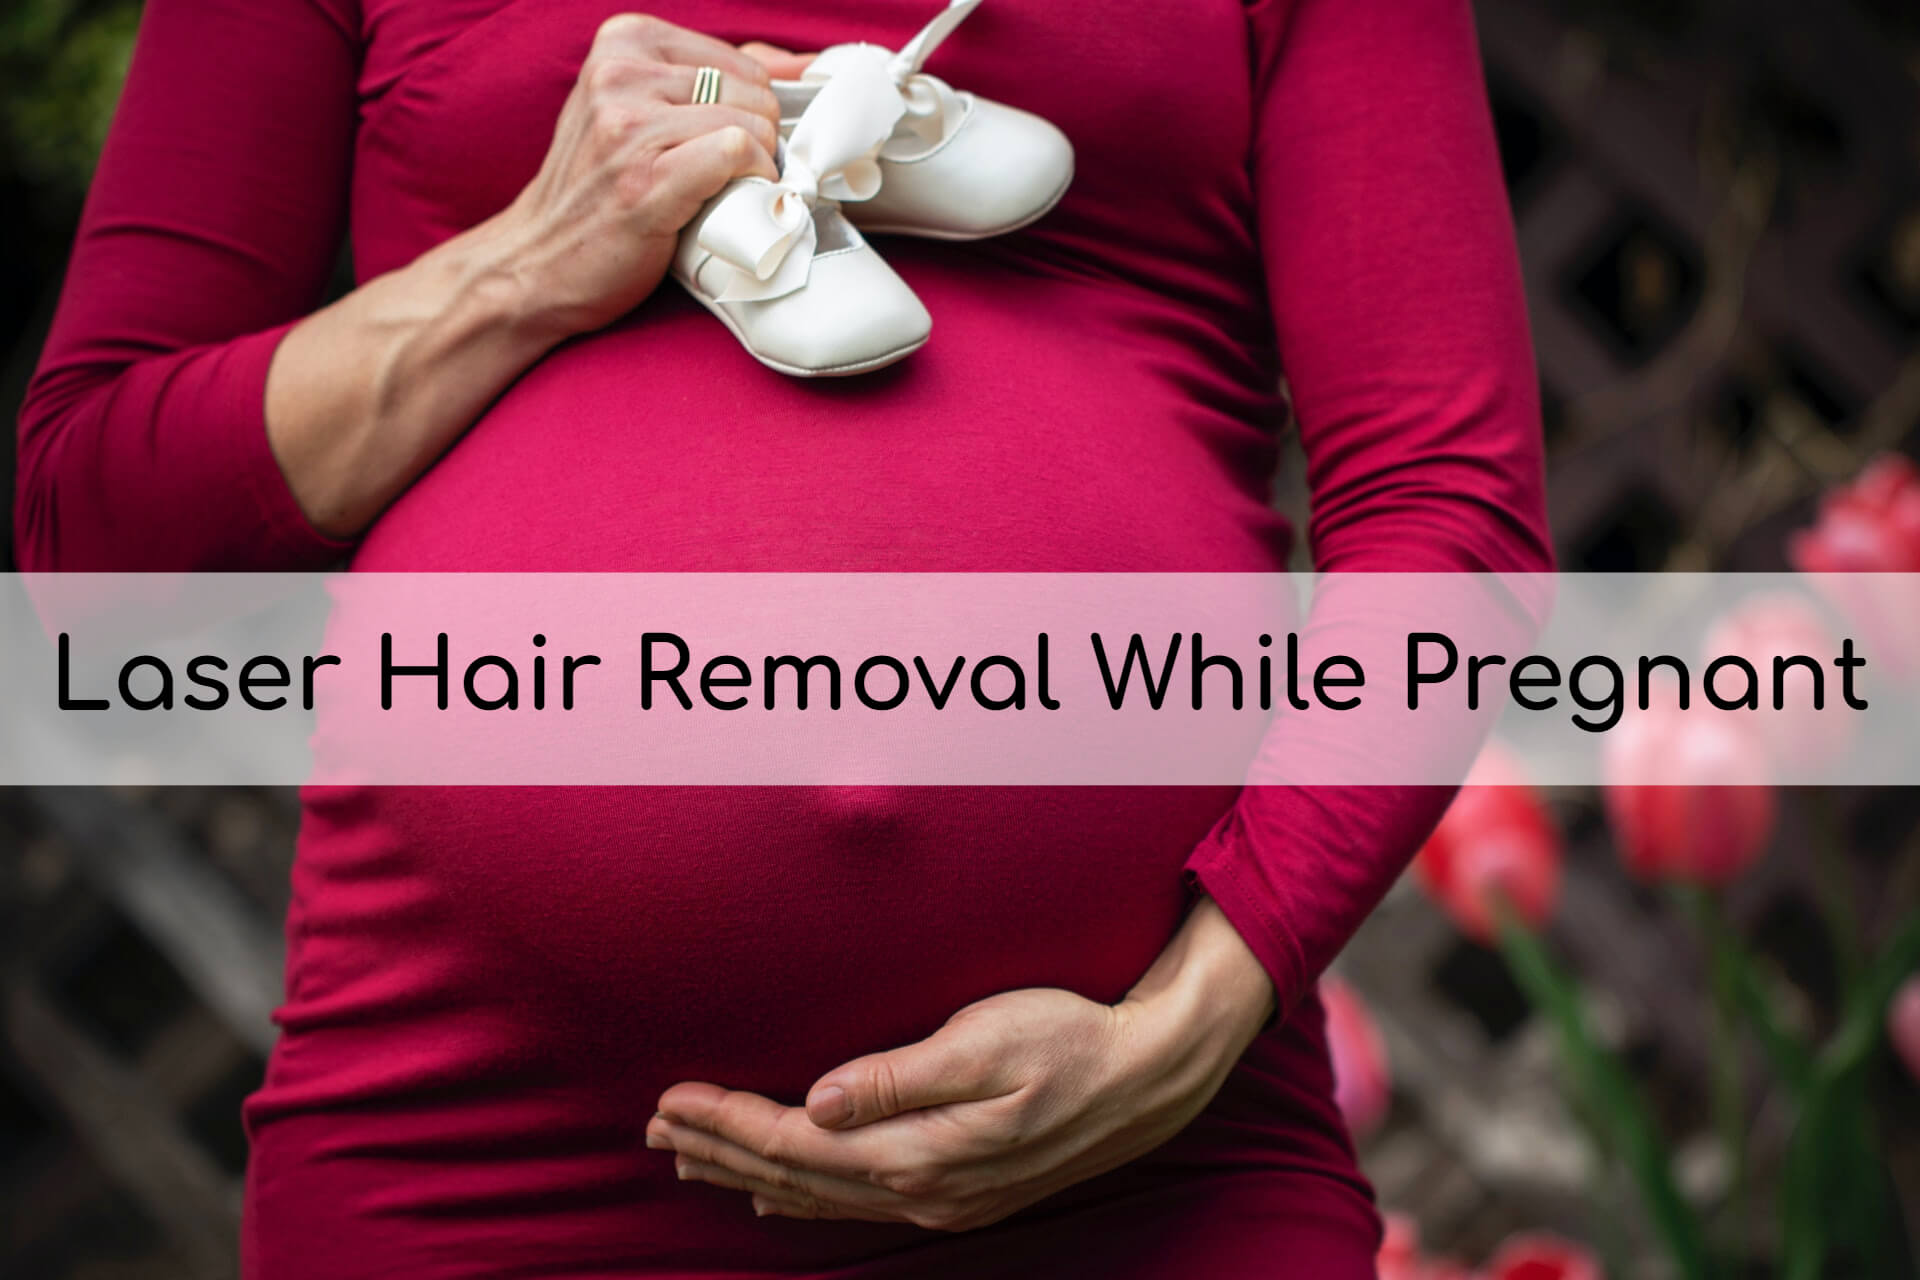 Laser Hair Removal and Pregnancy: What You Need to Know